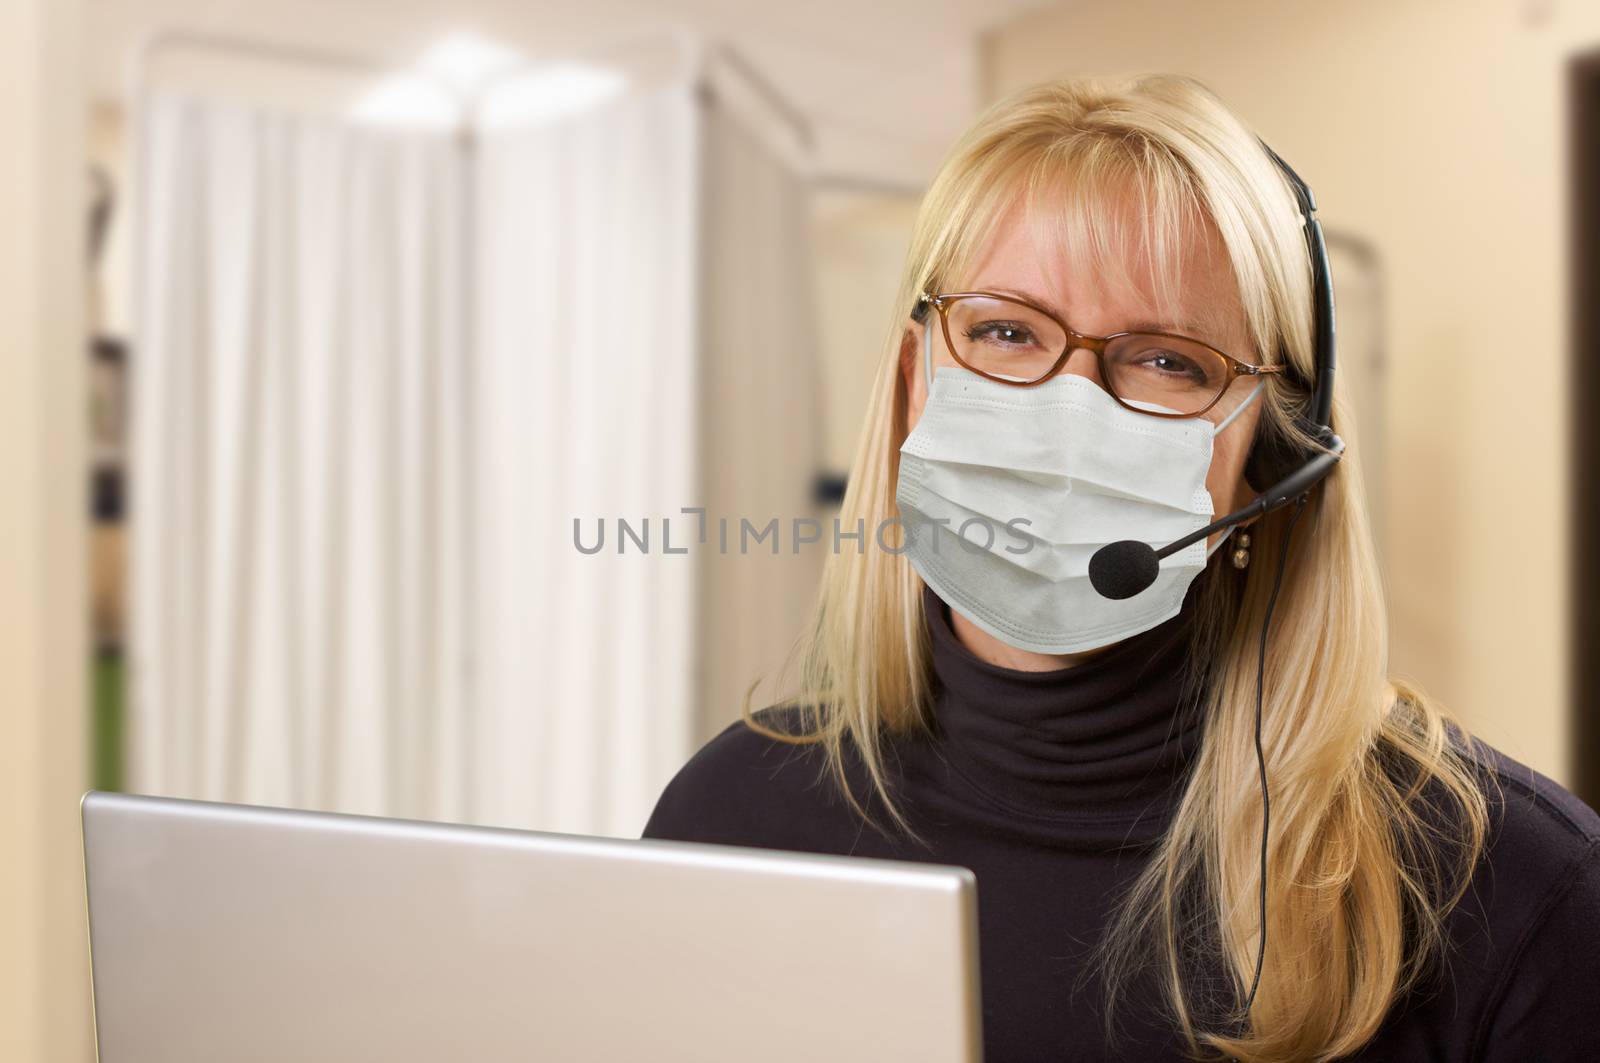 Woman At Medical Office Desk Wearing Face Mask by Feverpitched